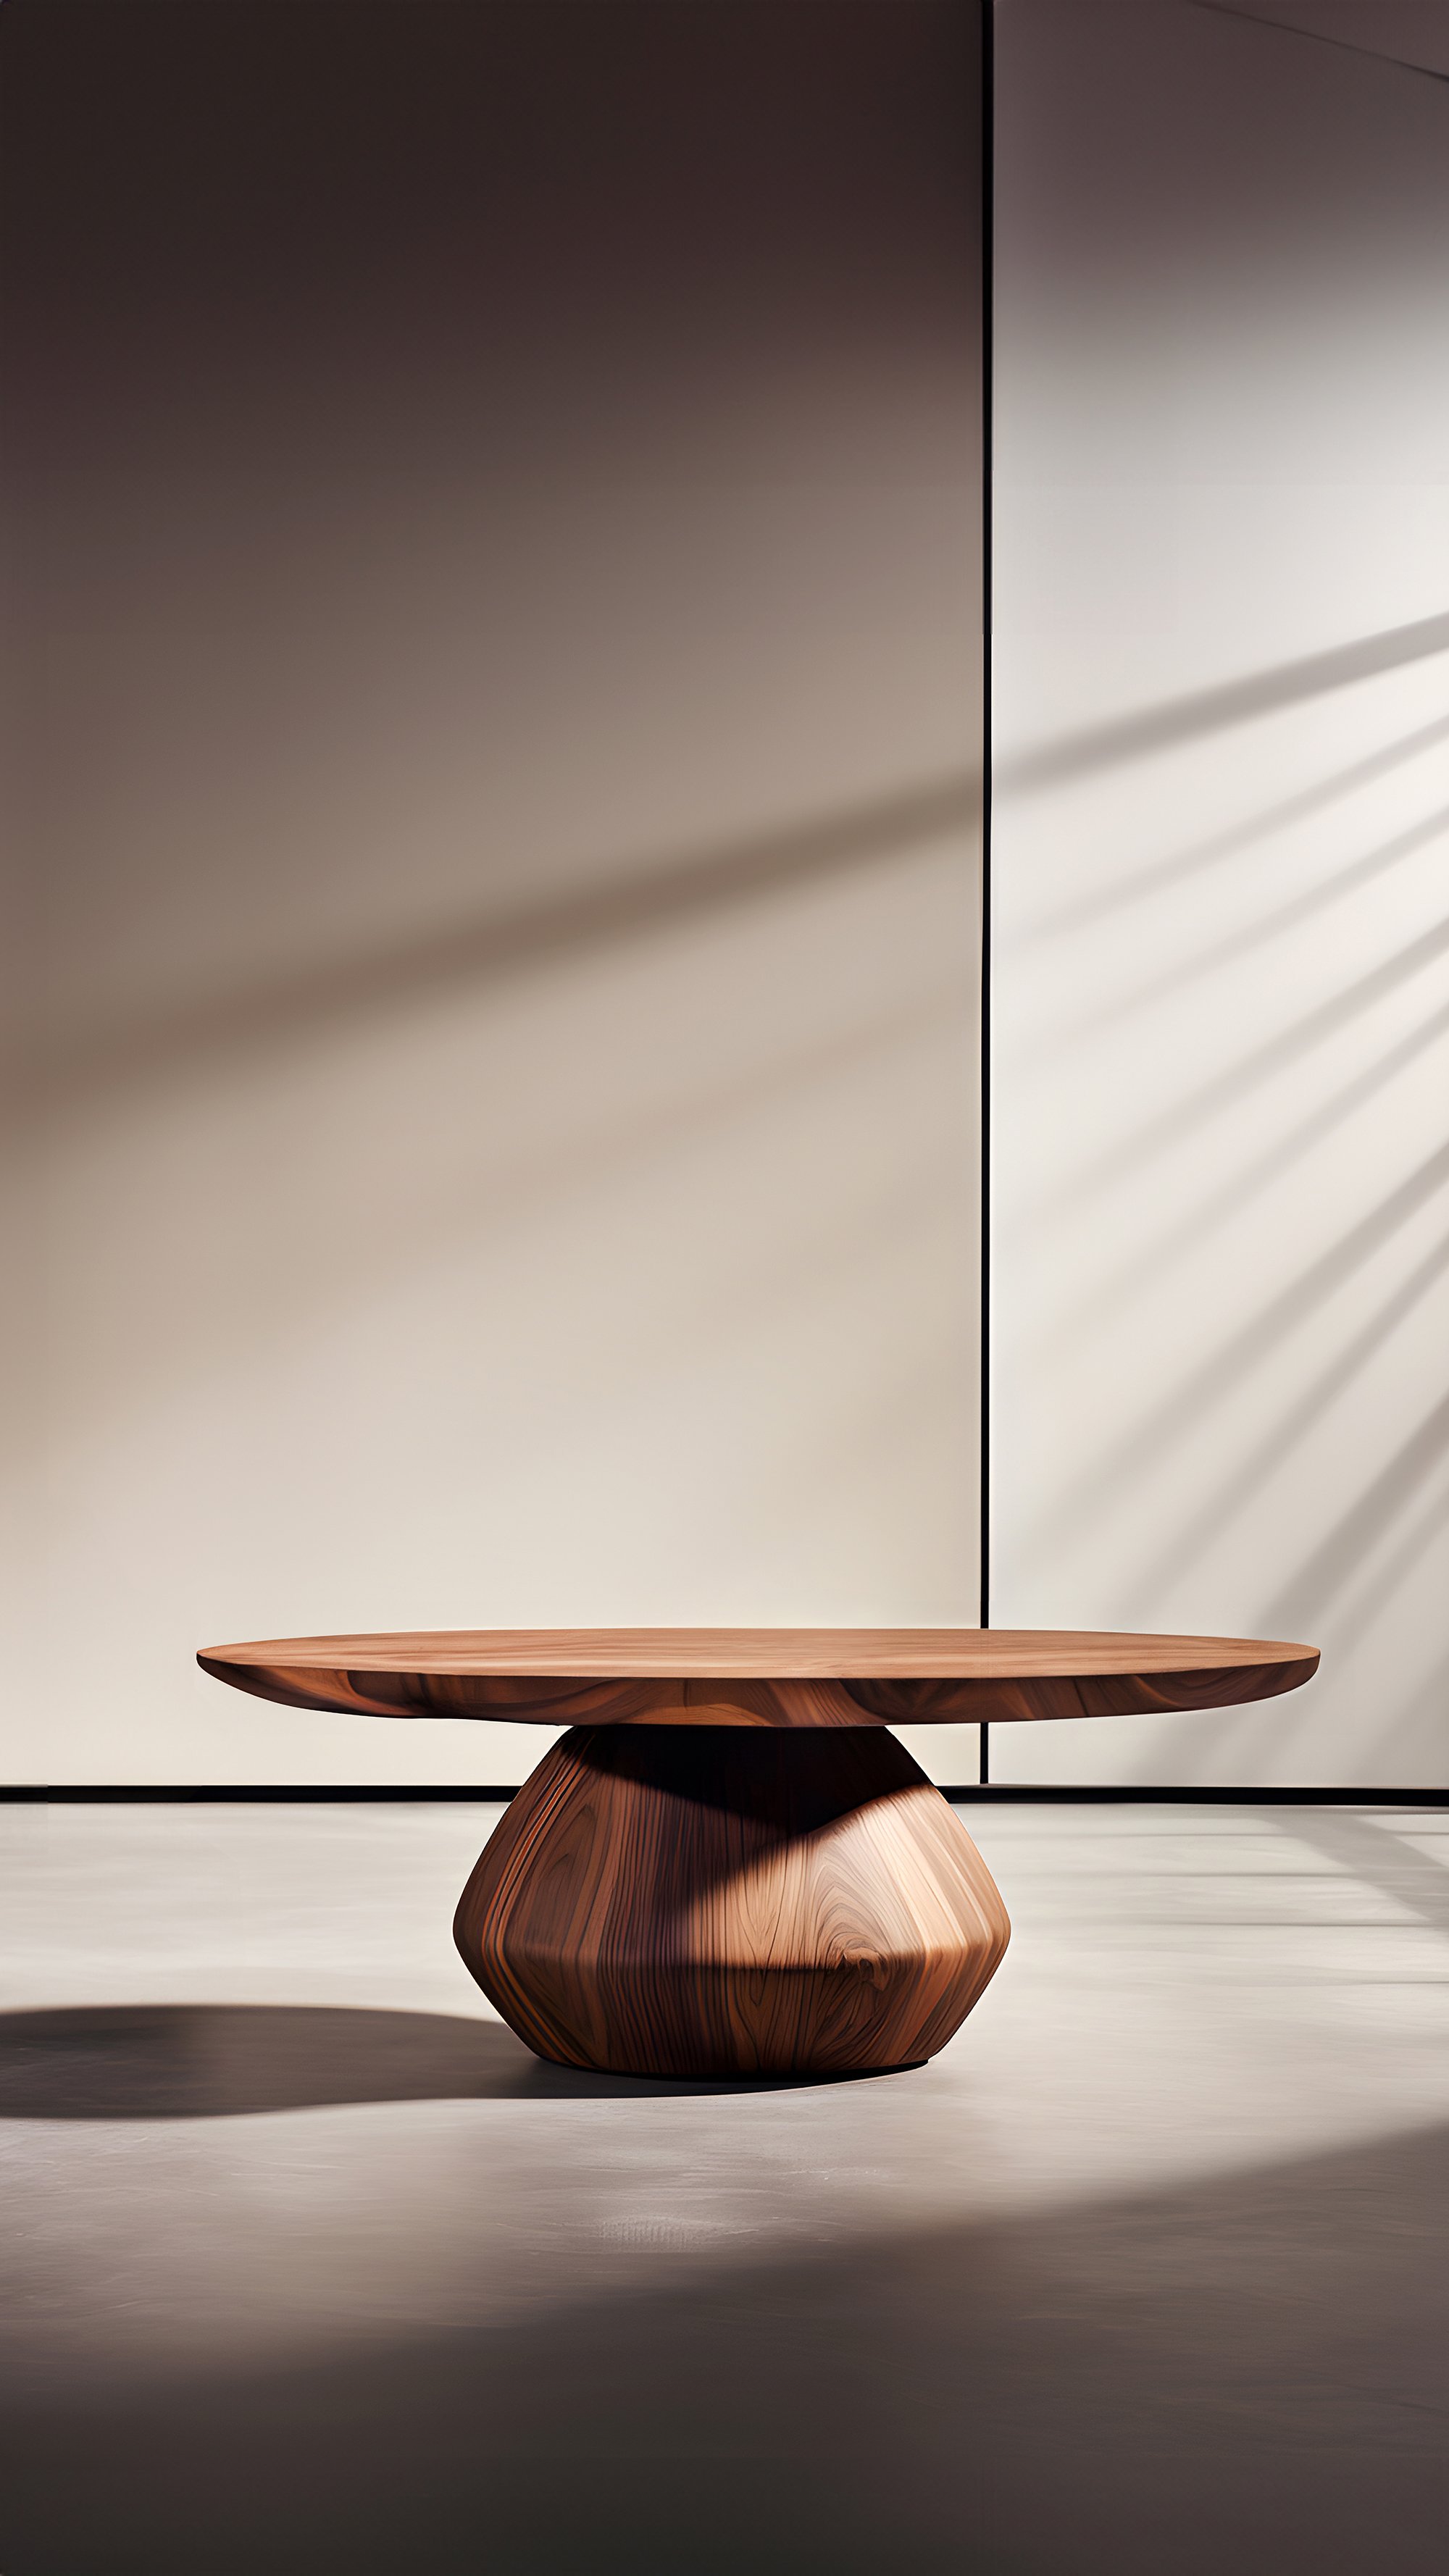 Sculptural Coffee Table Made of Solid Wood, Center Table Solace S42 by Joel Escalona — 6.jpg